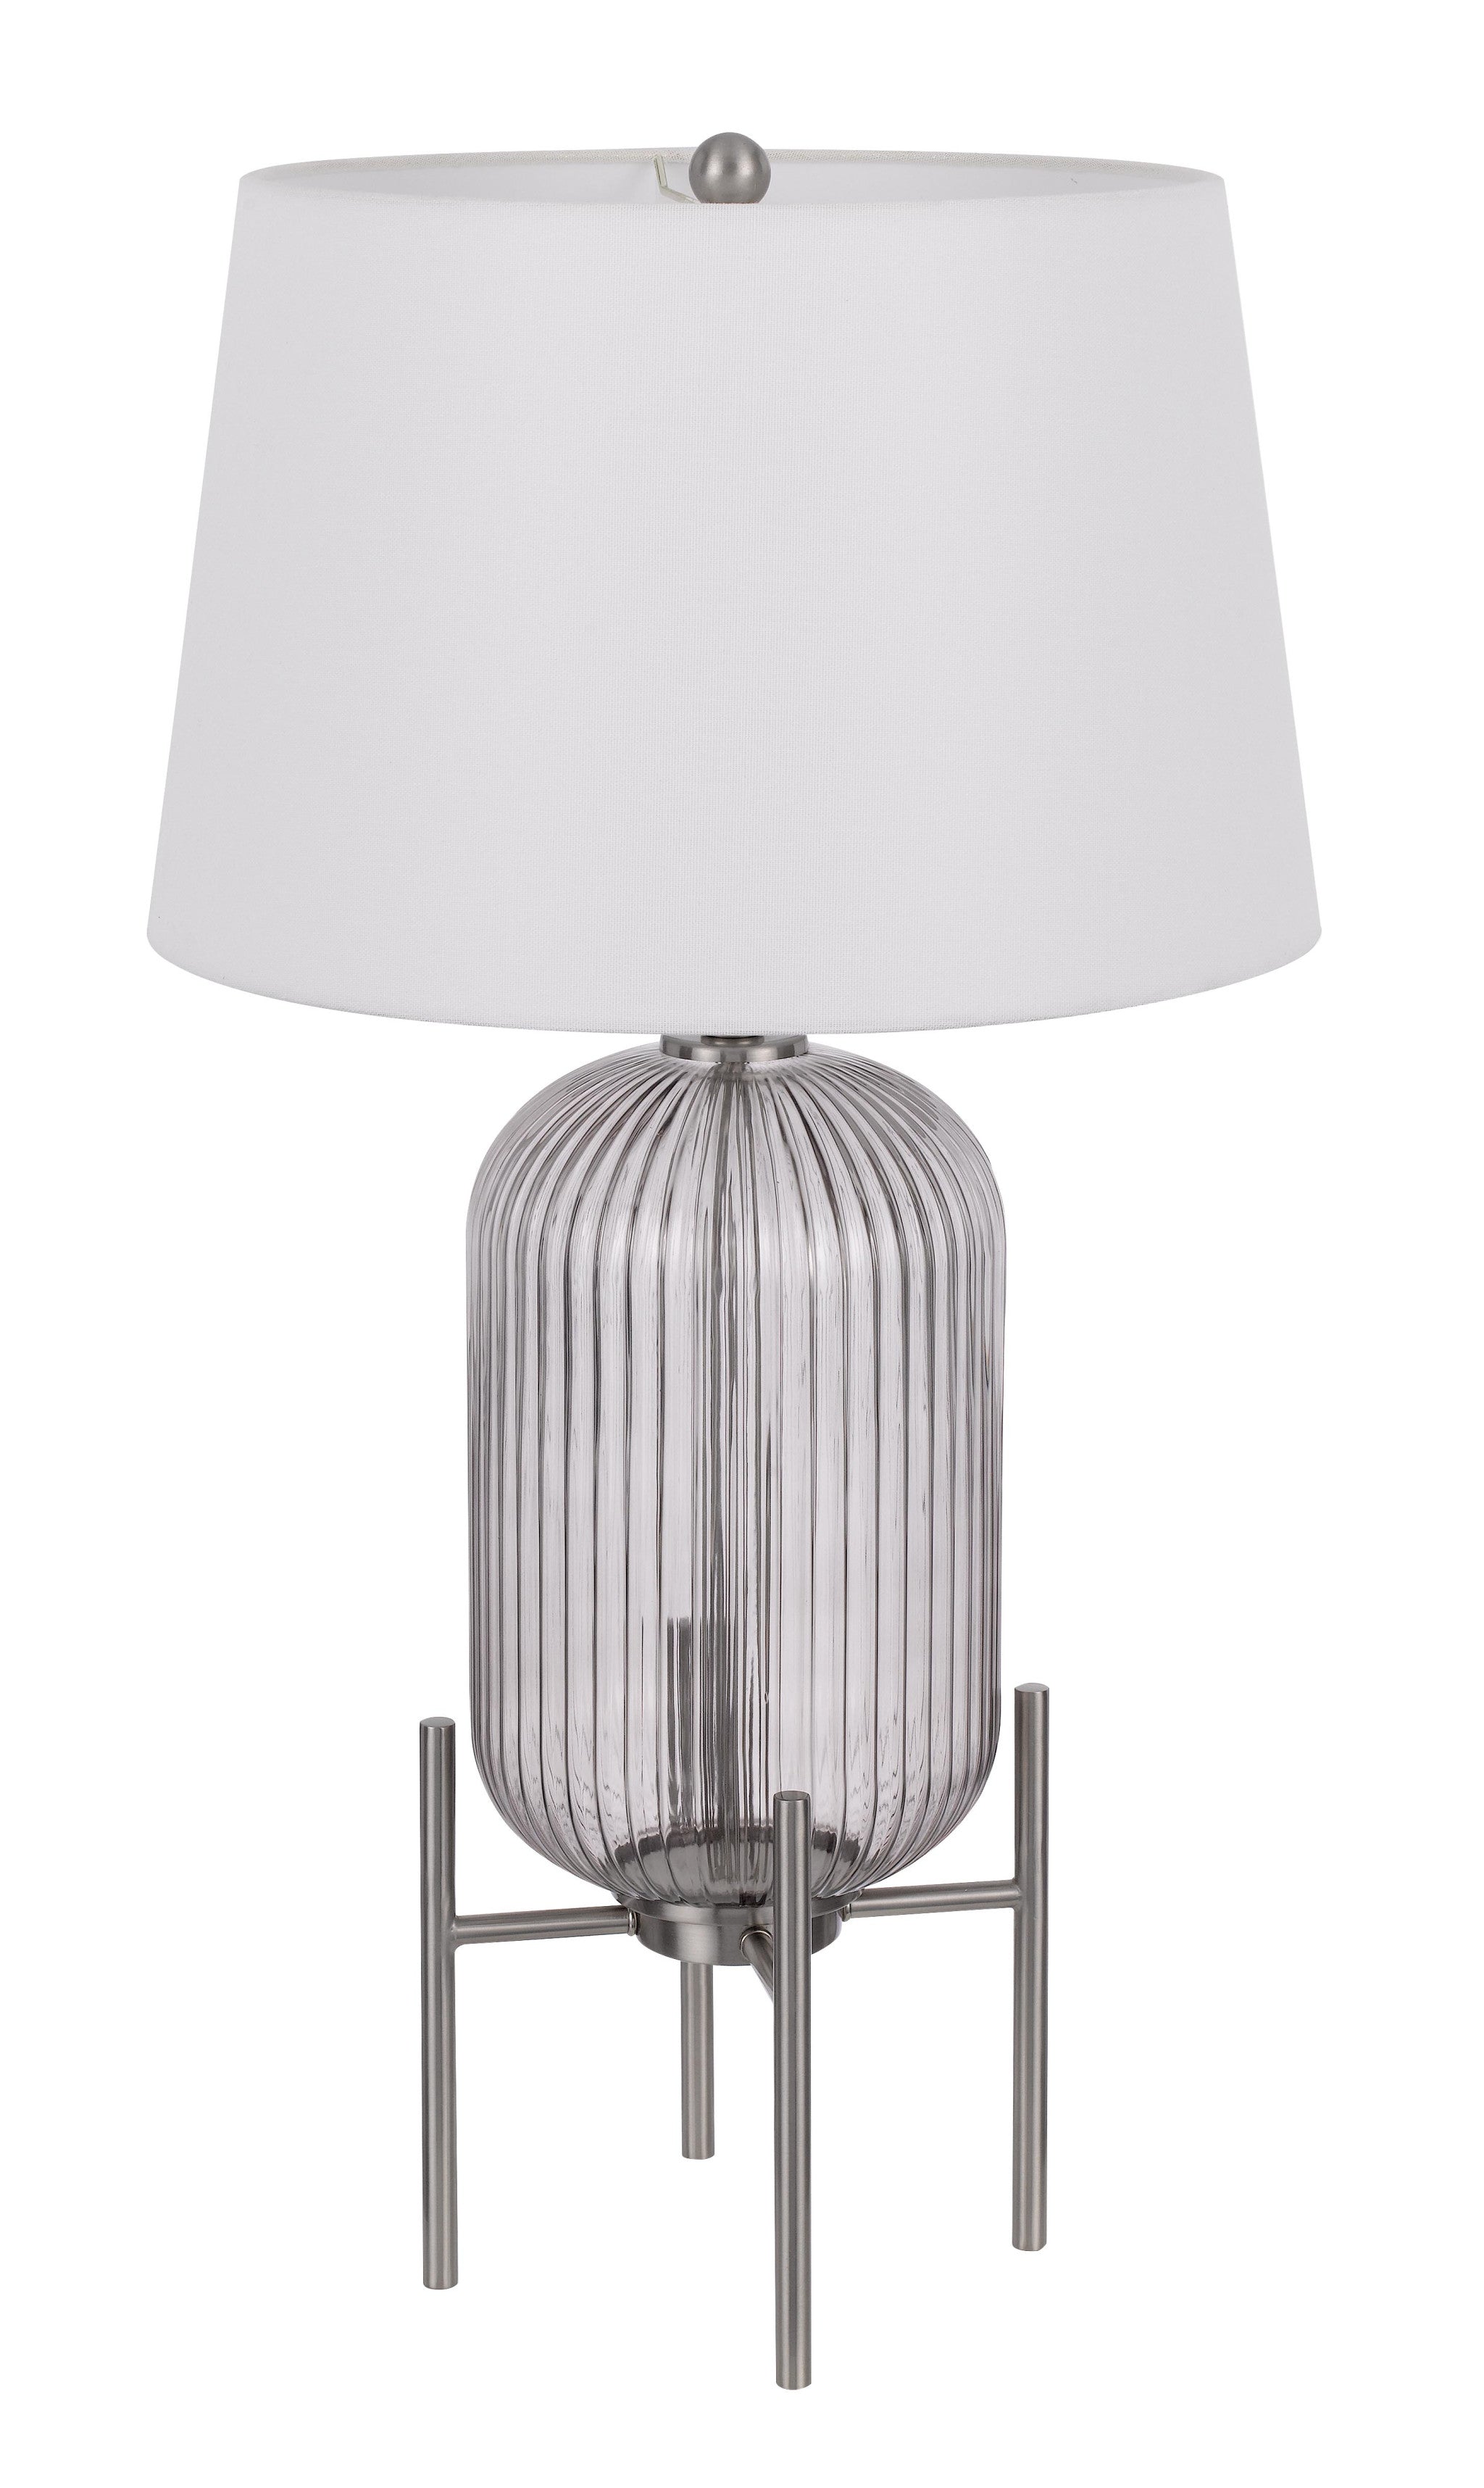 33" Nickel Glass Table Lamp With White Empire Shade